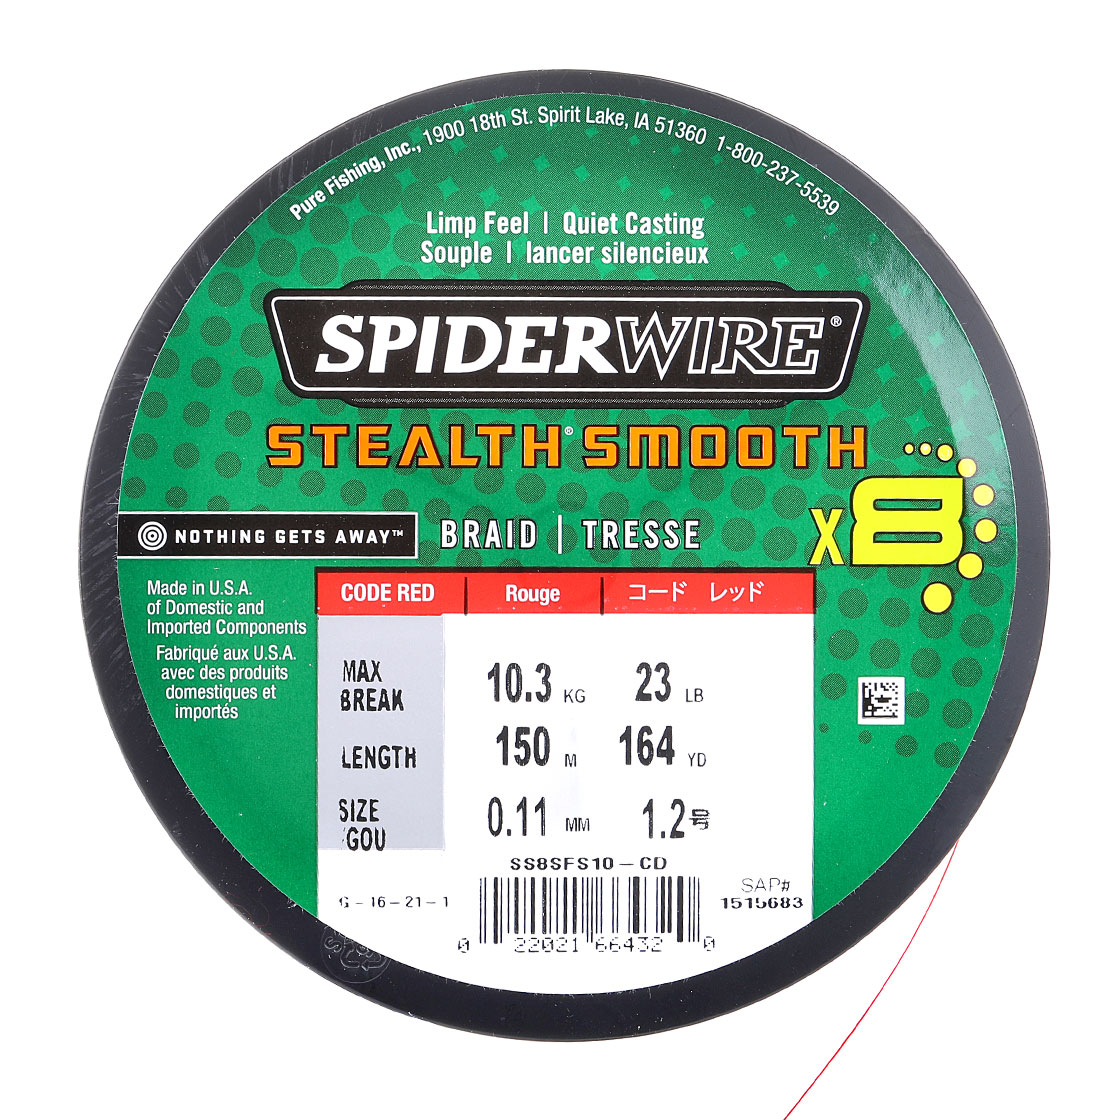 SpiderWire Stealth Smooth 8 braid review - around £15 or less for